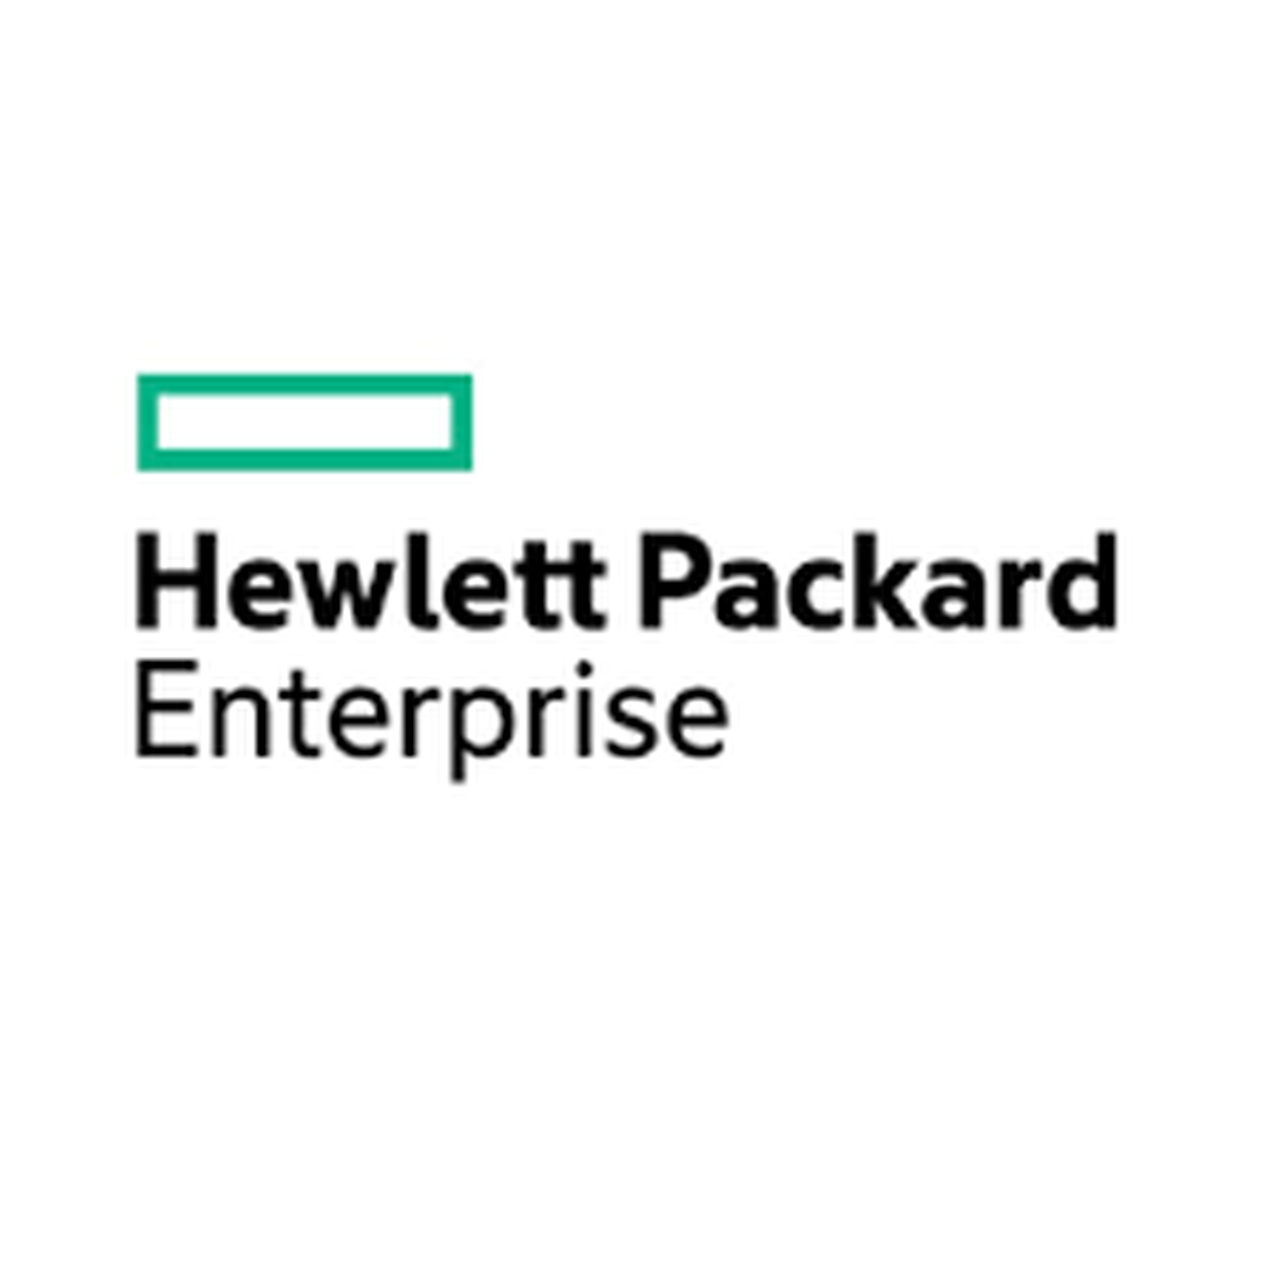 HPE 1 Year Post Warranty Foundation Care, Next Business Day wDMR BL680c G7 Service